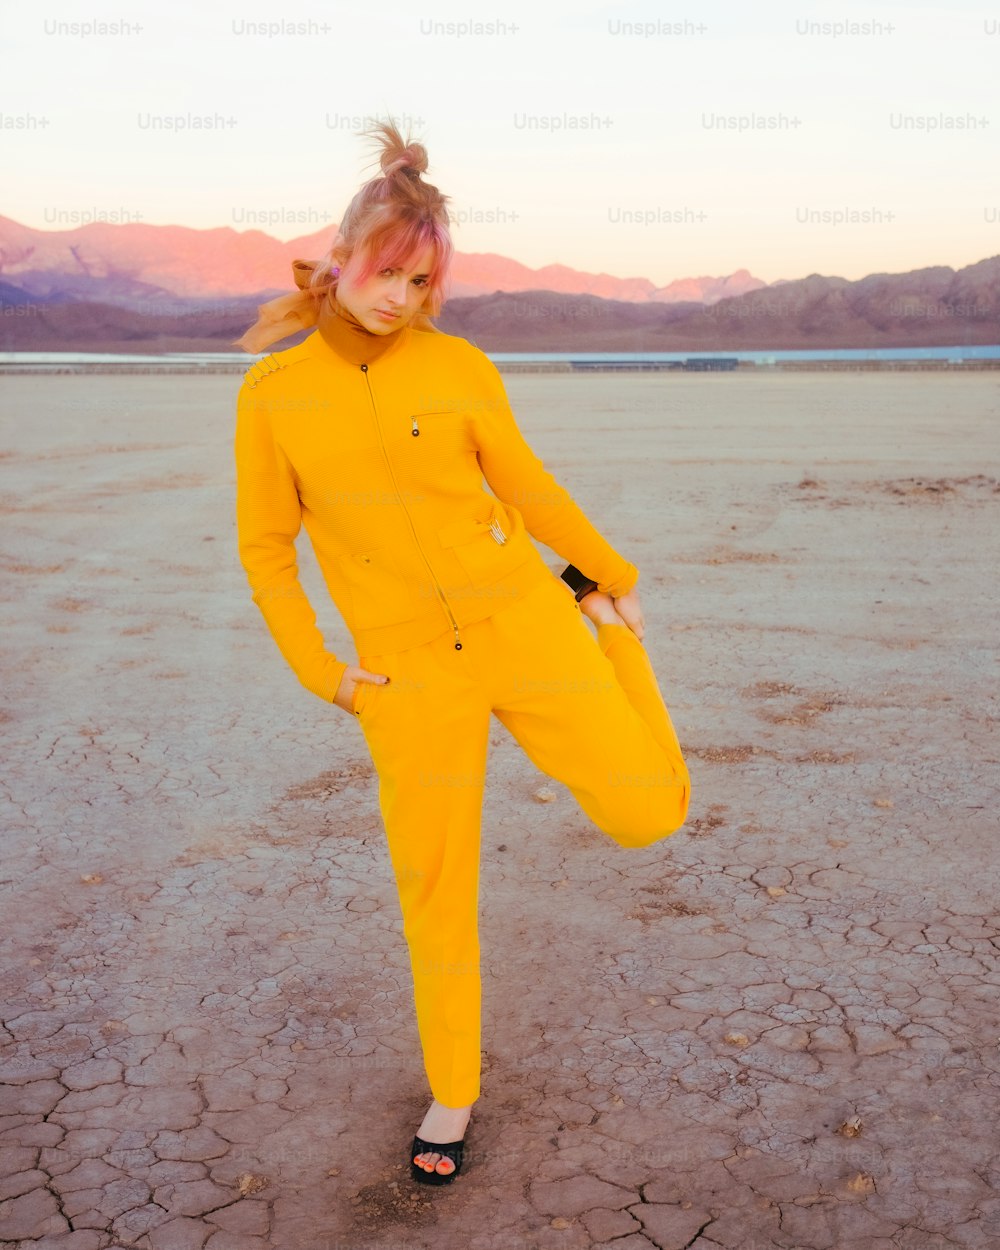 a woman in a yellow suit standing in a desert